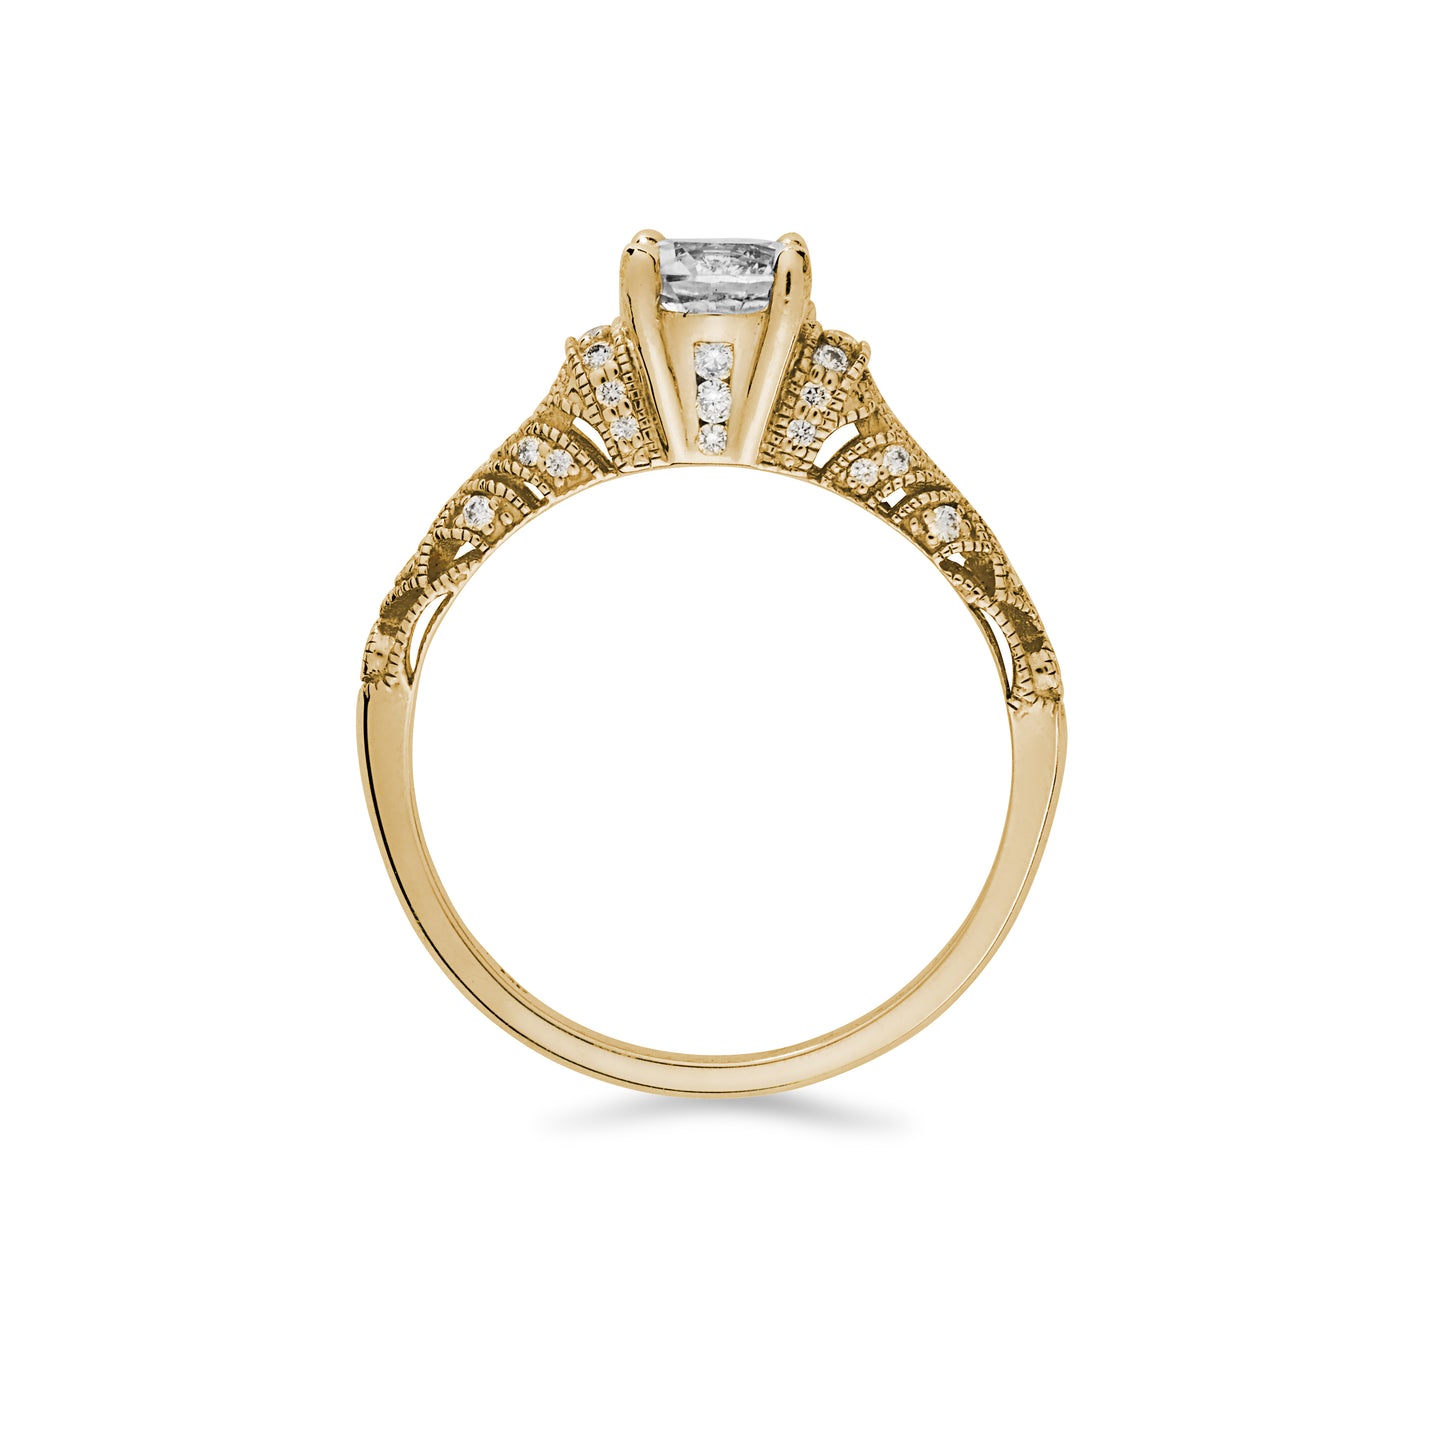 Side view of the Josephine ring with white sapphire center stone on white background.